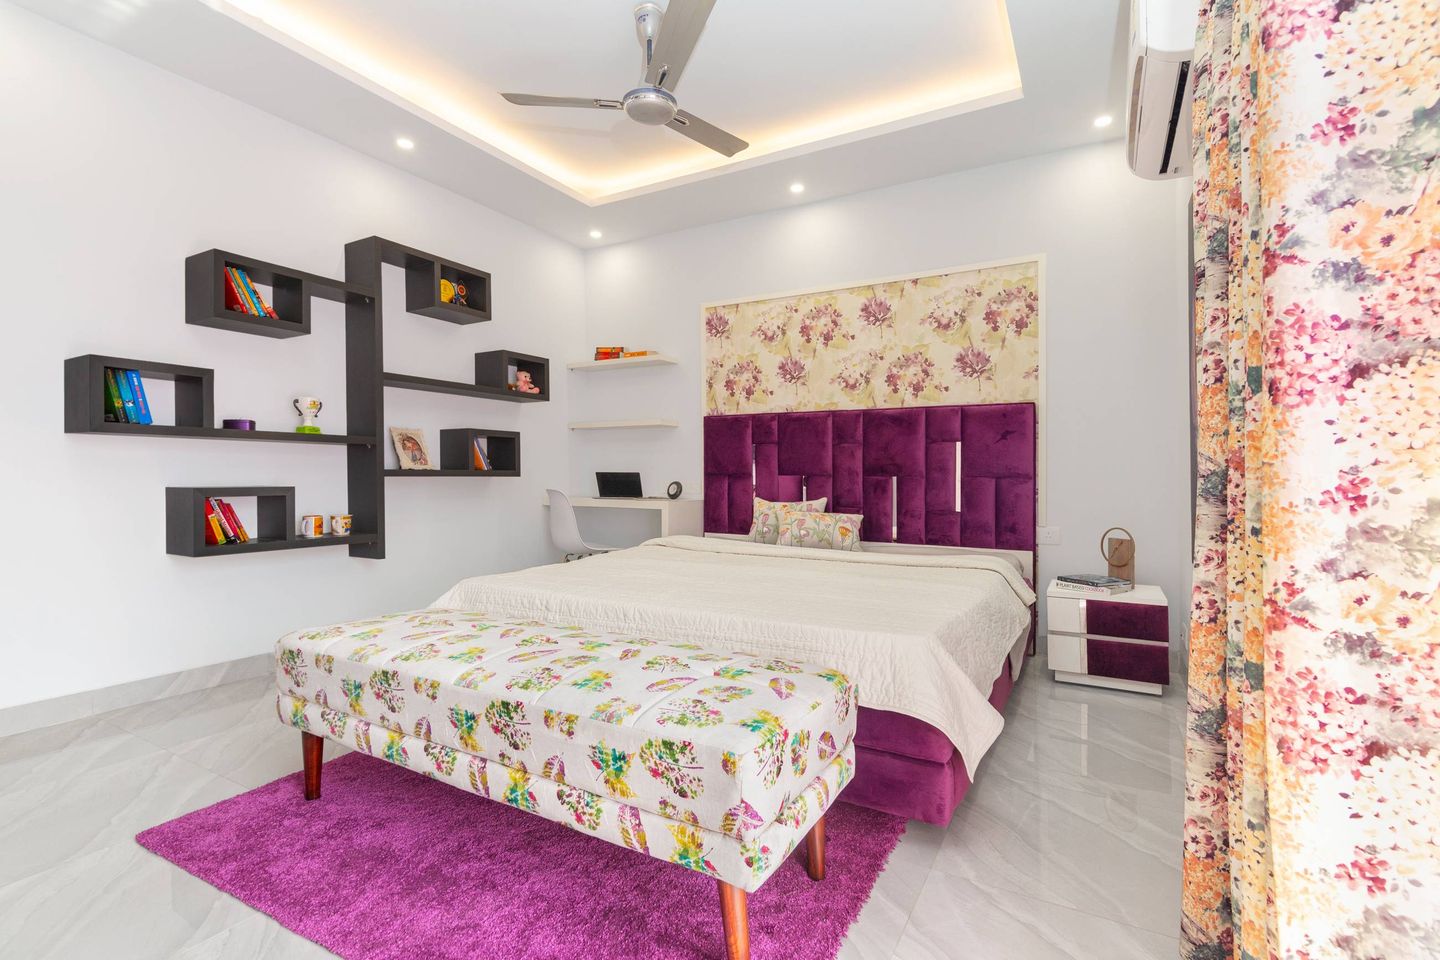 Modern Kids Bedroom Design With Floral Wallpaper And Glossy White Flooring